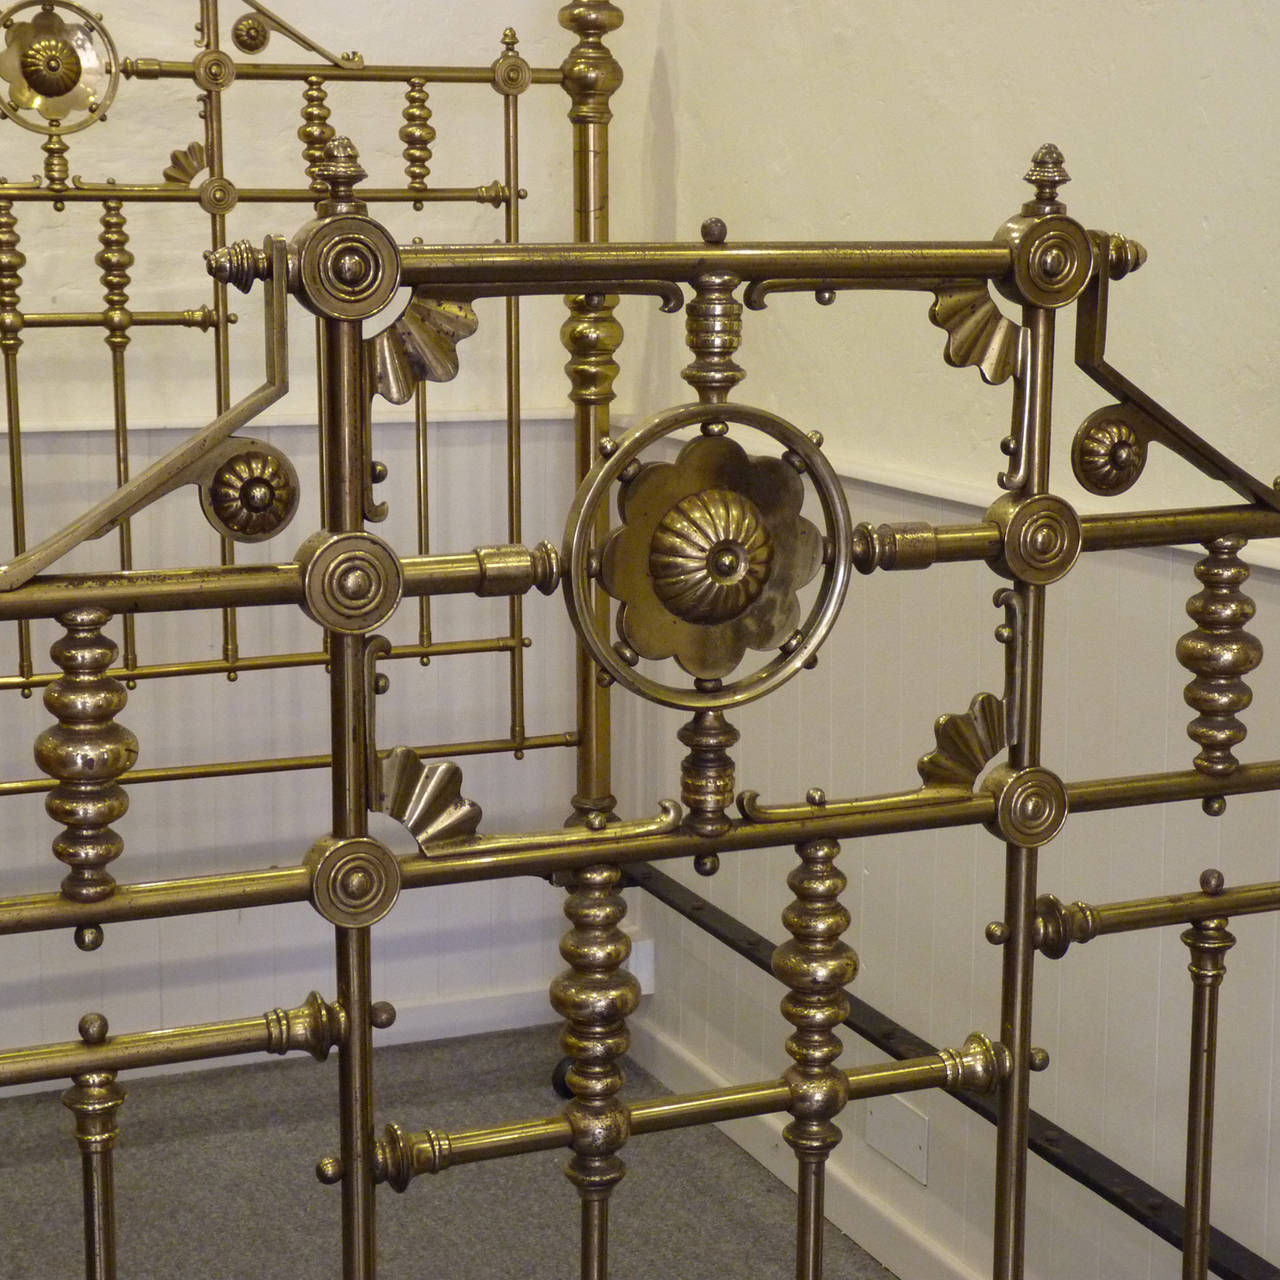 An original late-Victorian brass bedstead in superb condition manufactured by Maples. The decorative fittings are all cast brass, creating a substantial, heavy and totally original brass bed. 

This bed will accept a British king-size or American